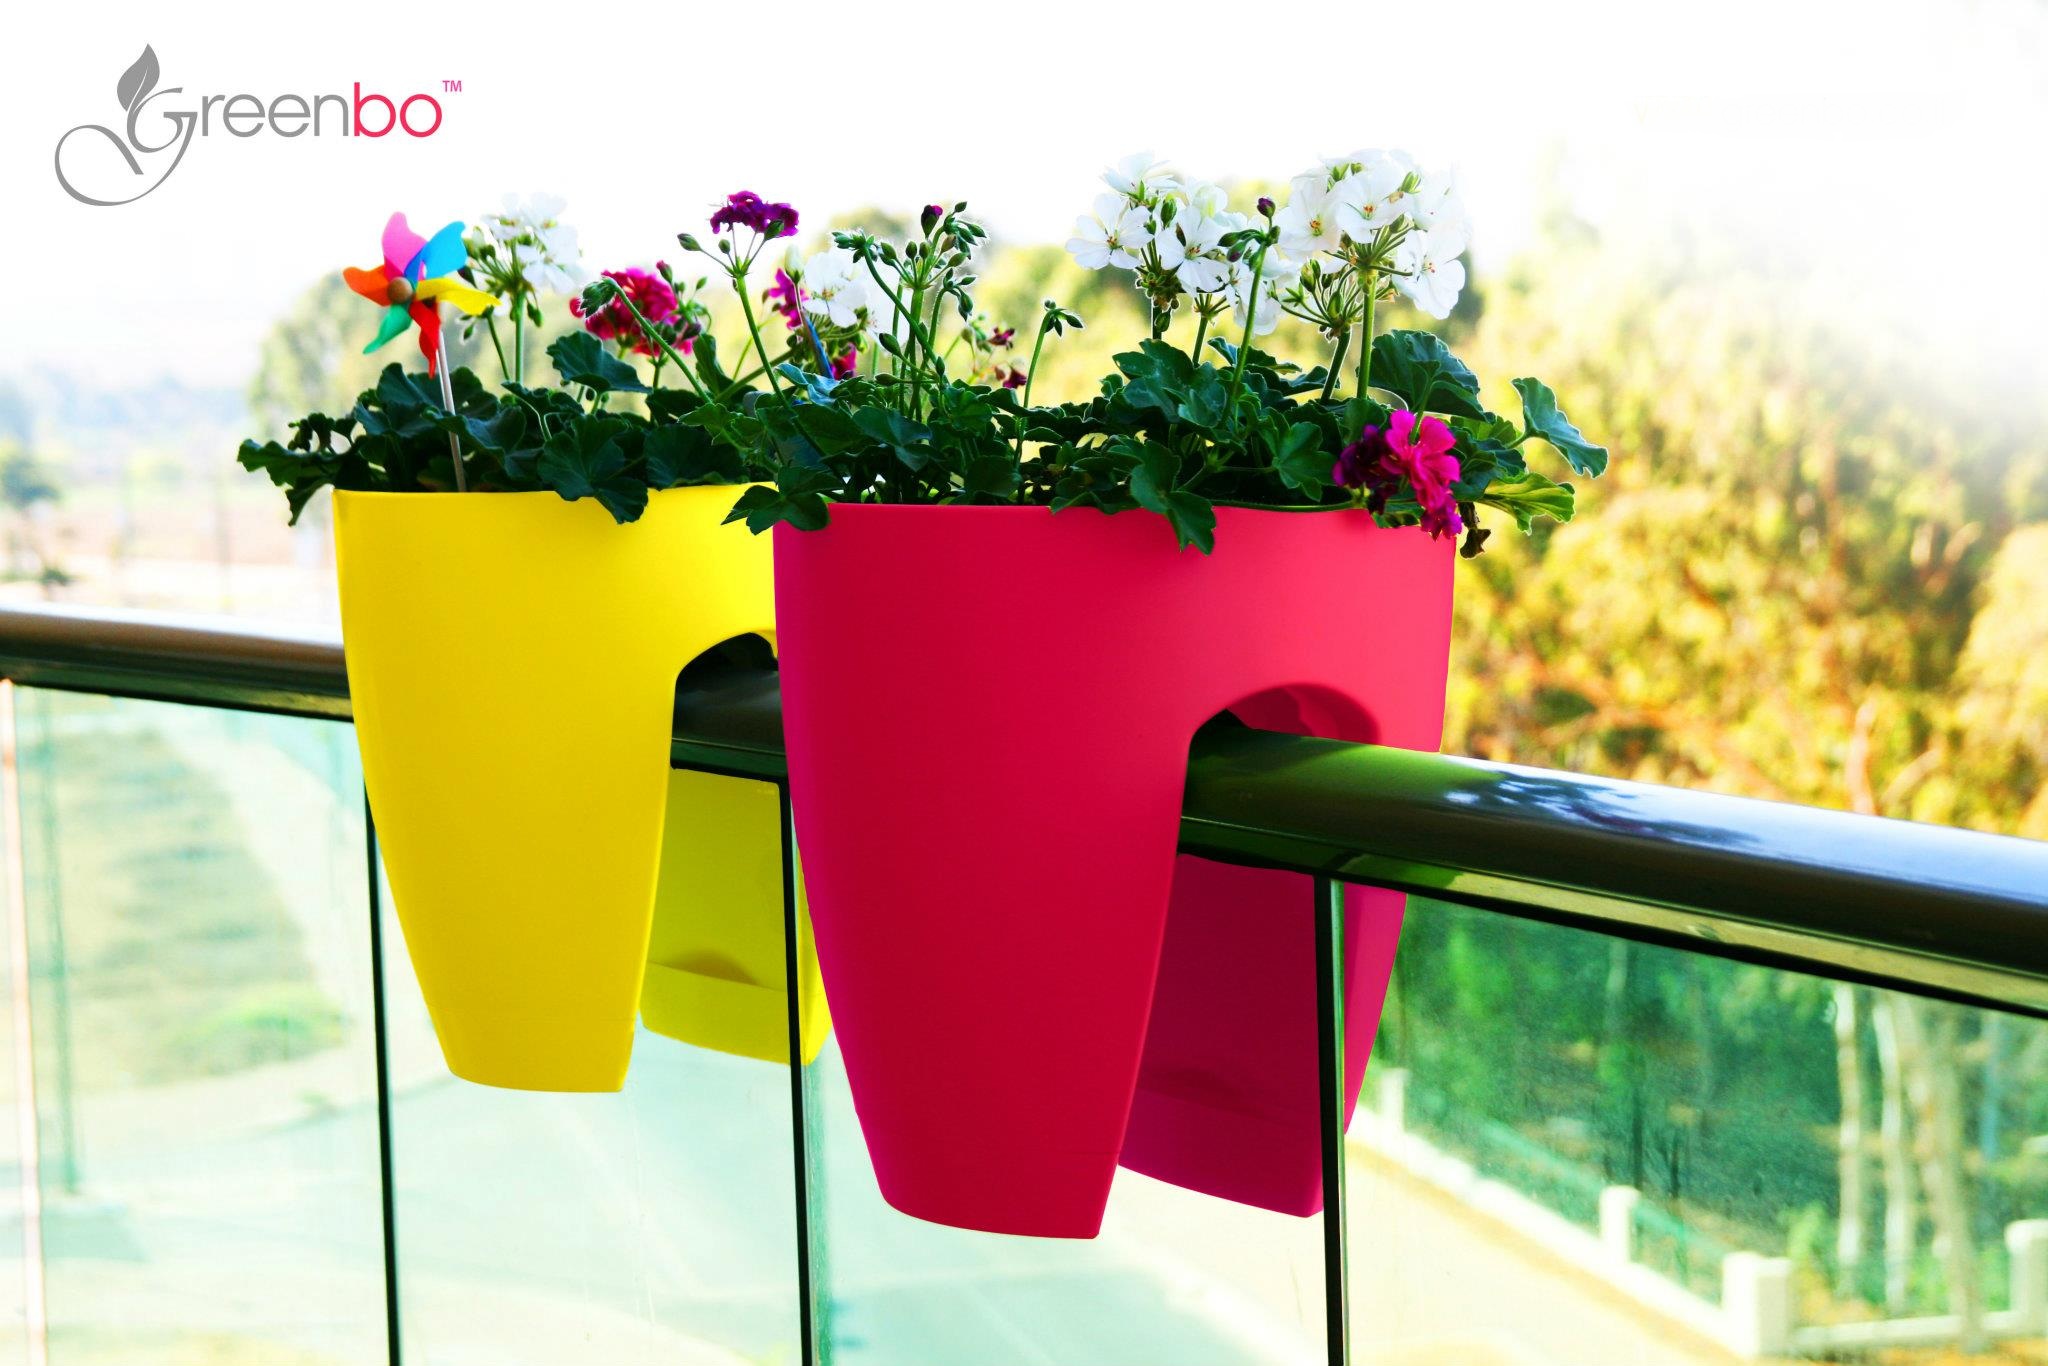 Greenbo Planter pots designed by Miki Ganor sit easily on your balcony or balustrade for space-saving greenery, available at Top 3 By Design